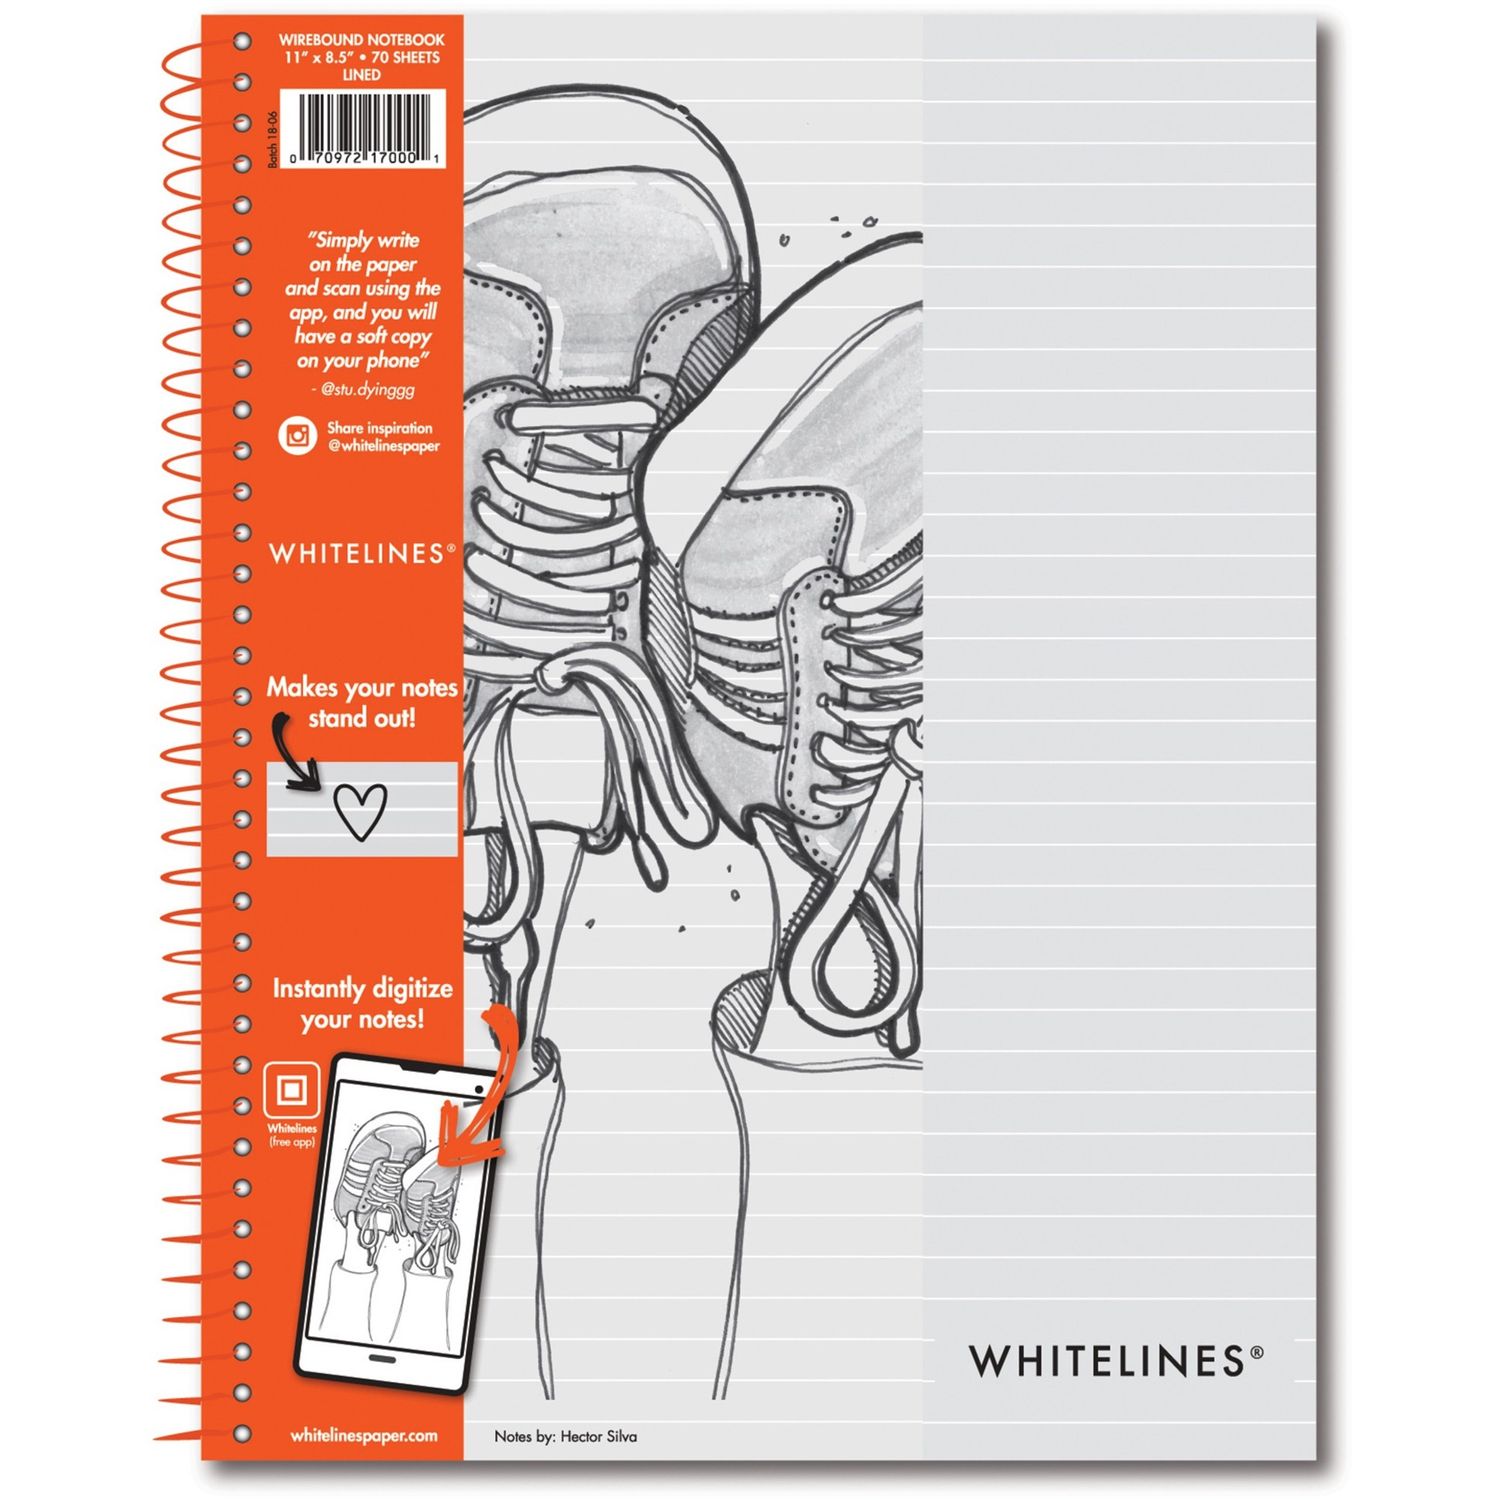 Whitelines Premium Line Ruled Spiral Notebook 70 Sheets, 140 Pages, Printed, Spiral Bound, Both Side Ruling Surface, 20 lb Basis Weight, 75 g/m2 Grammage, 11" x 8 1/2", 0.33" x 8.5"11", Gray Paper